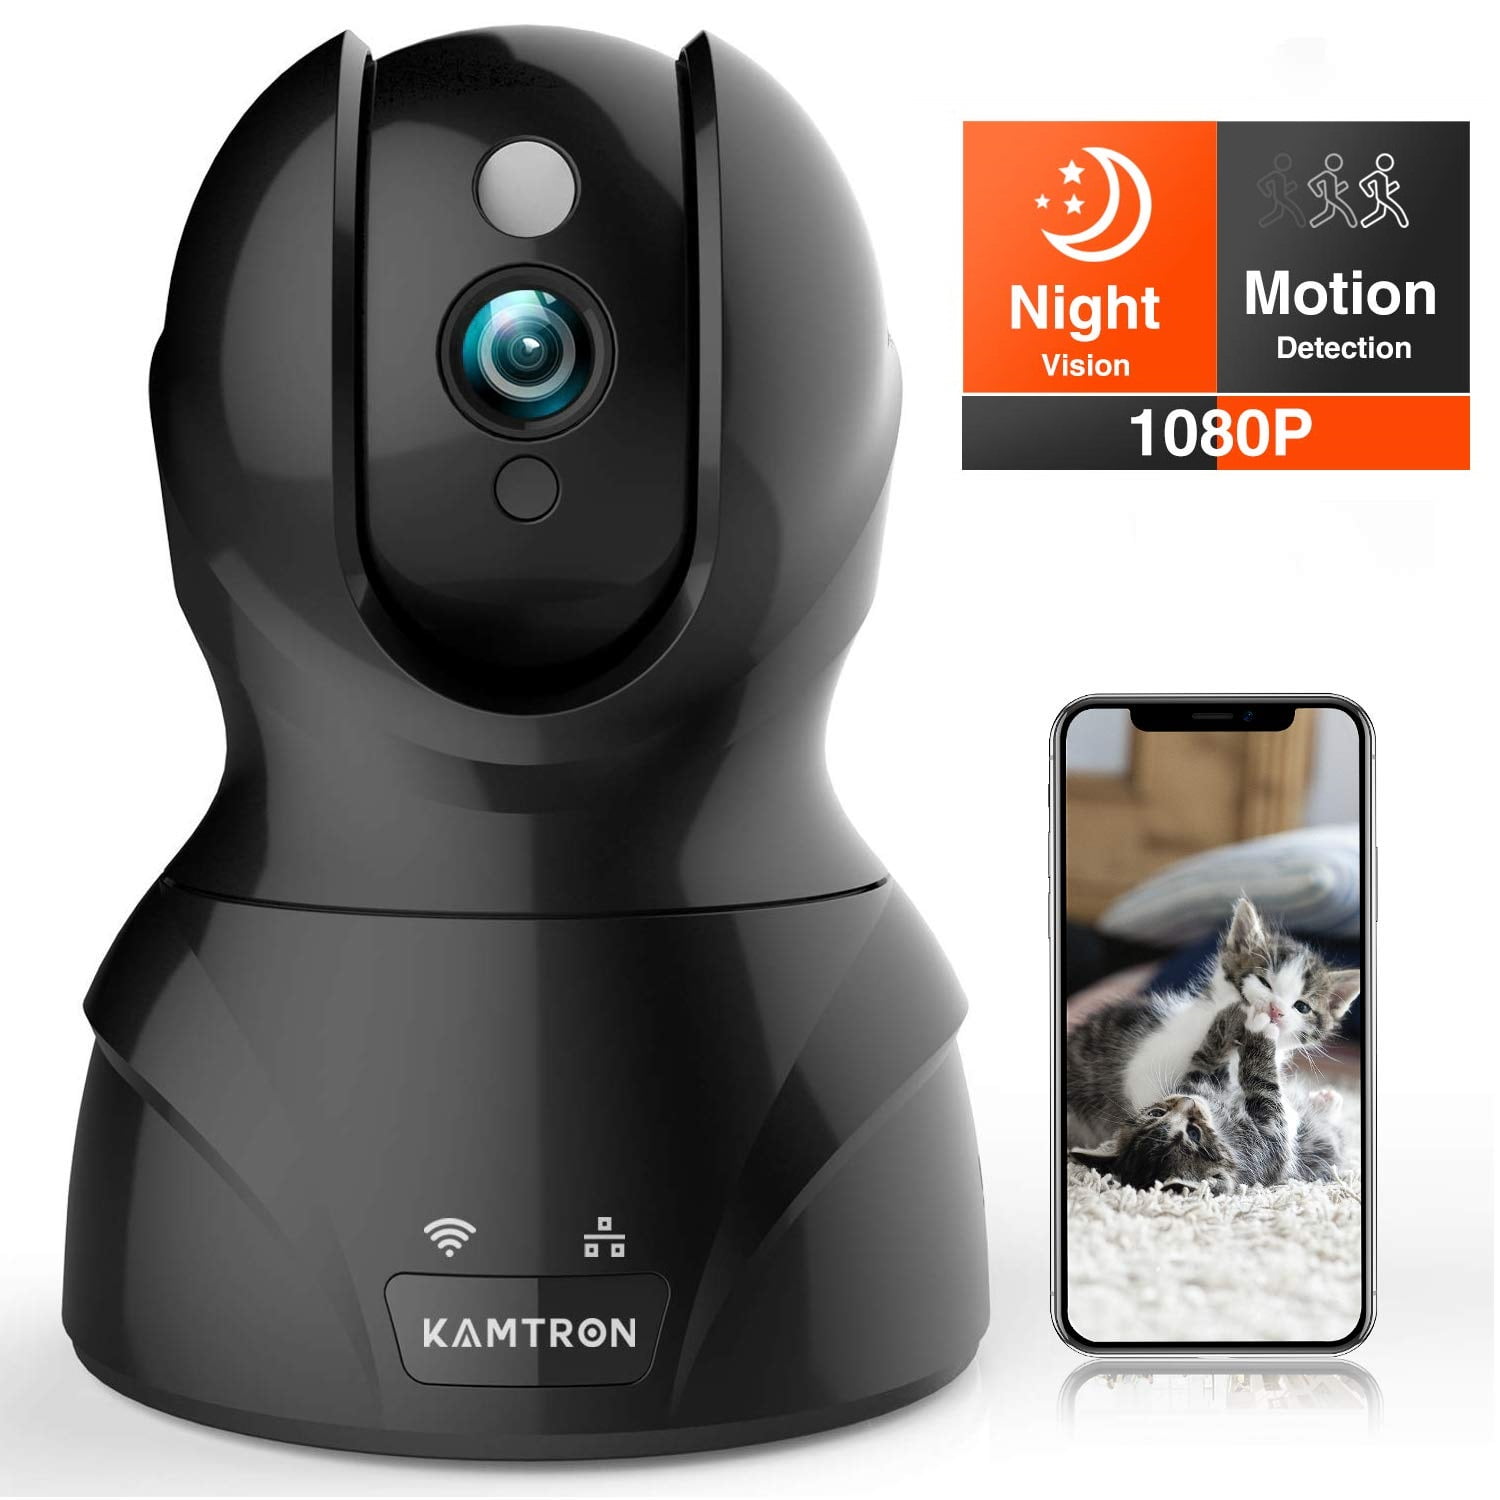 district Mustache plastic Security Camera 1080P WiFi Dog Pet Camera - Wireless Indoor Pan/Tilt/Zoom  Home Camera Baby Monitor IP Camera with Motion Detection Two-Way Audio,  Night Vision - Cloud Storage, Black - Walmart.com